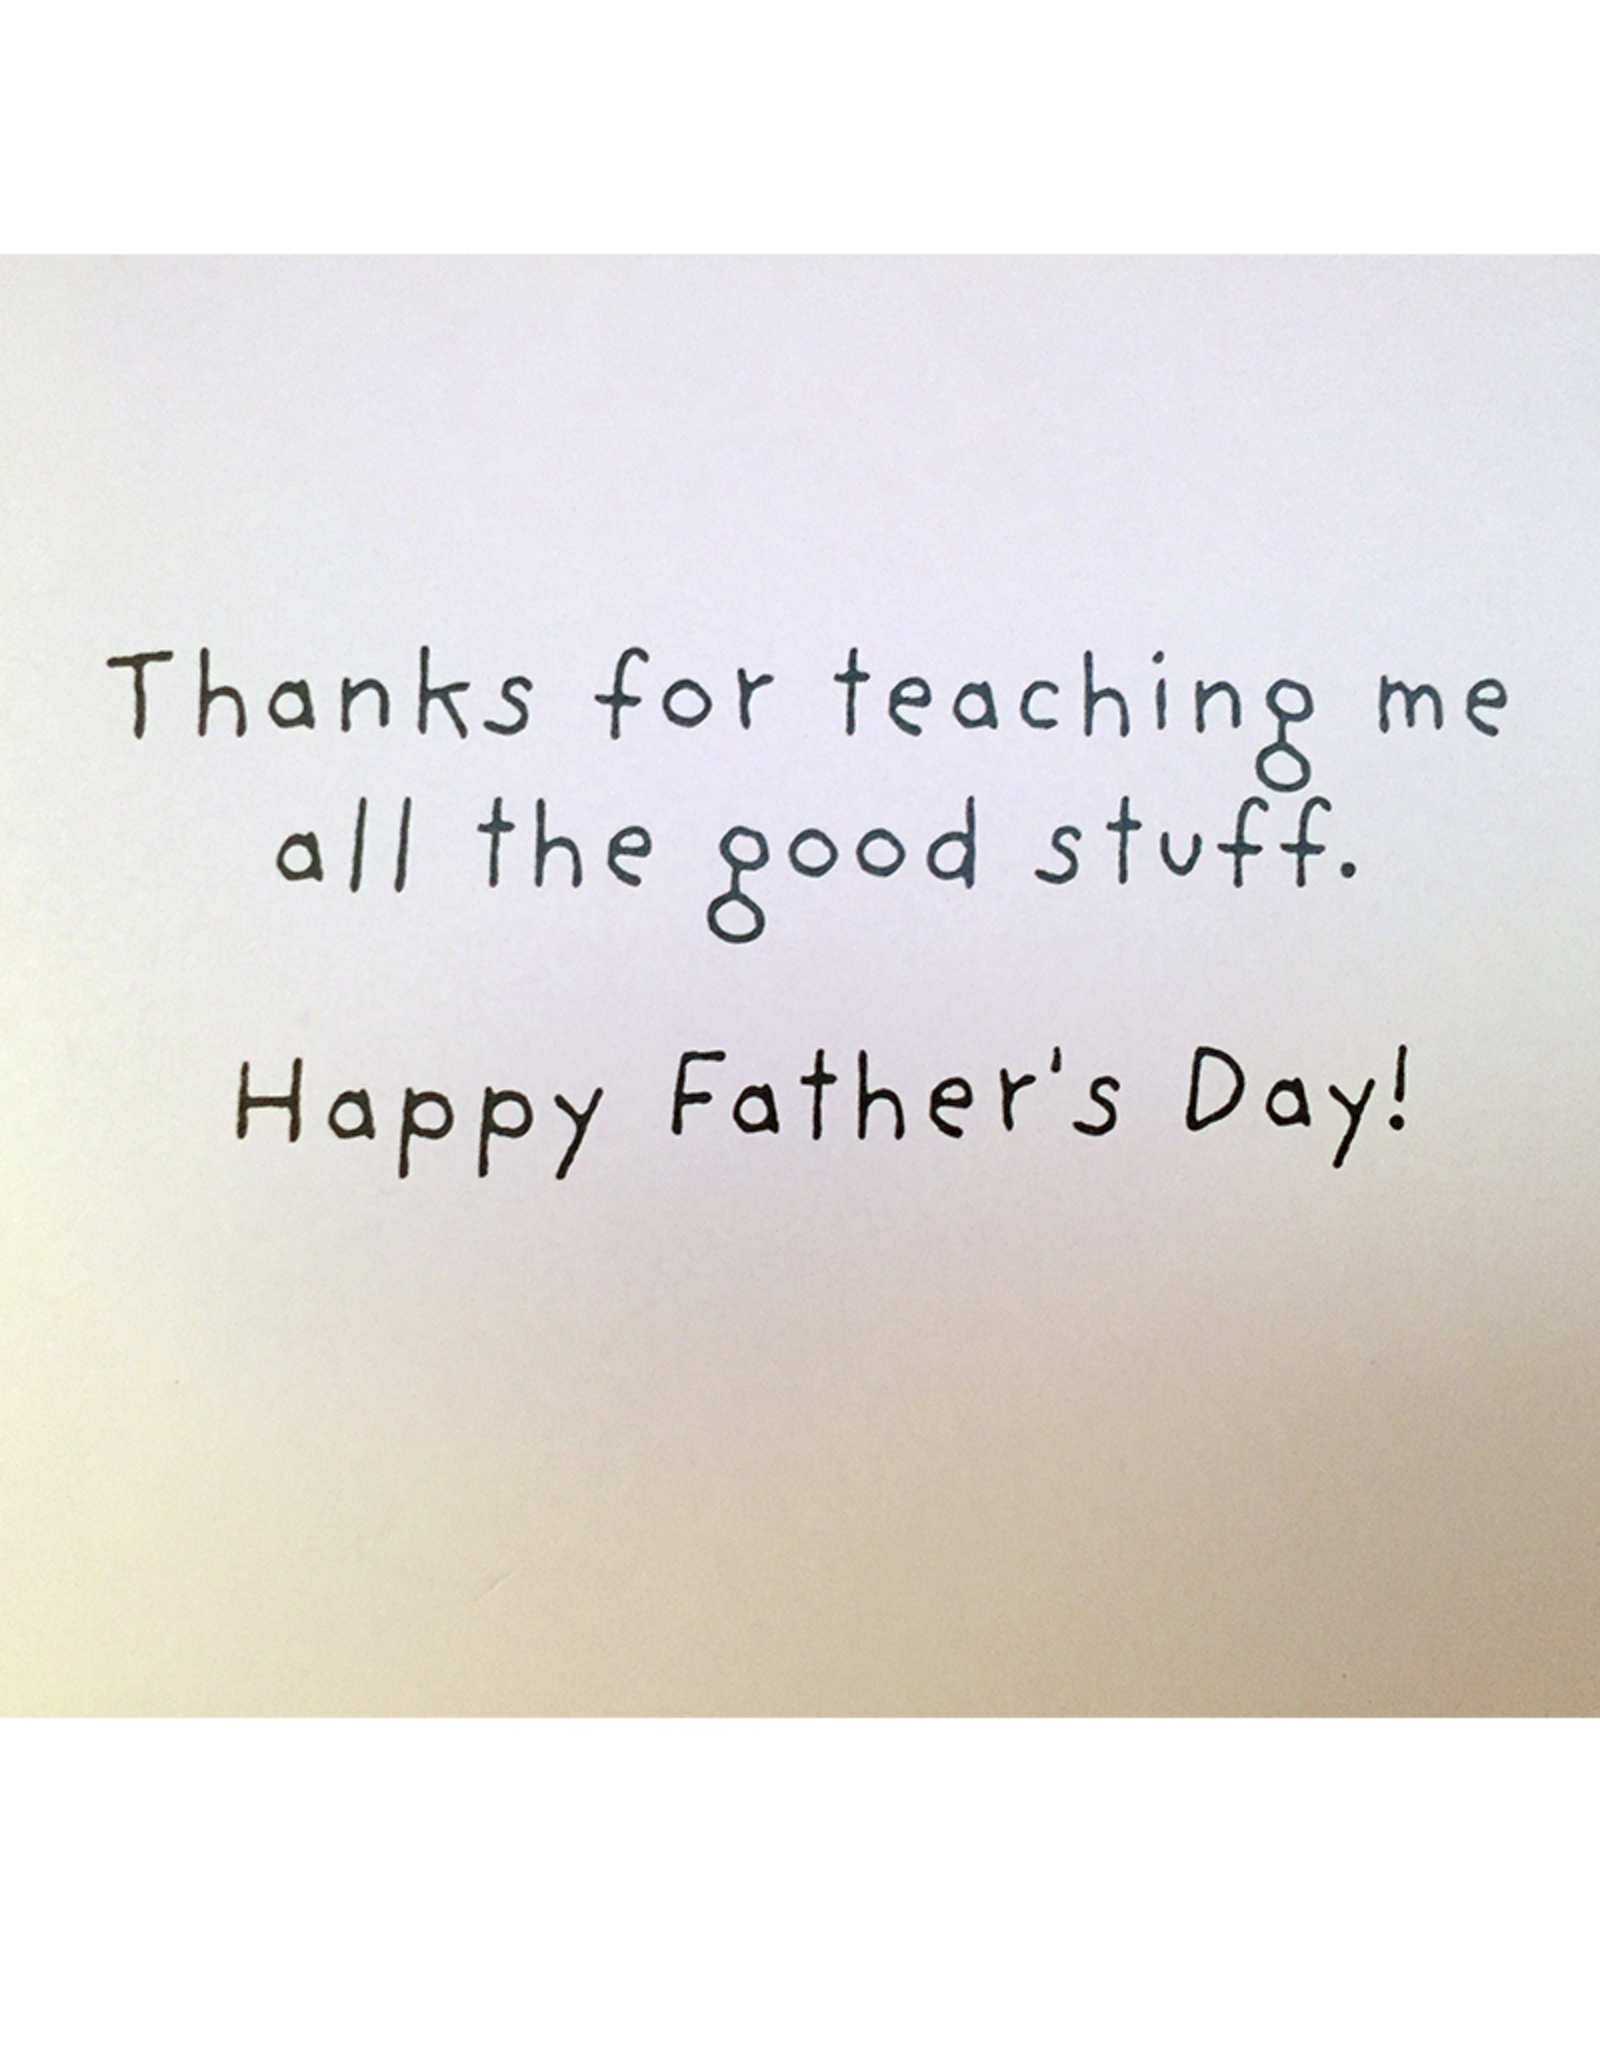 Avanti Fathers Day Card Dad and Daughter Golfing